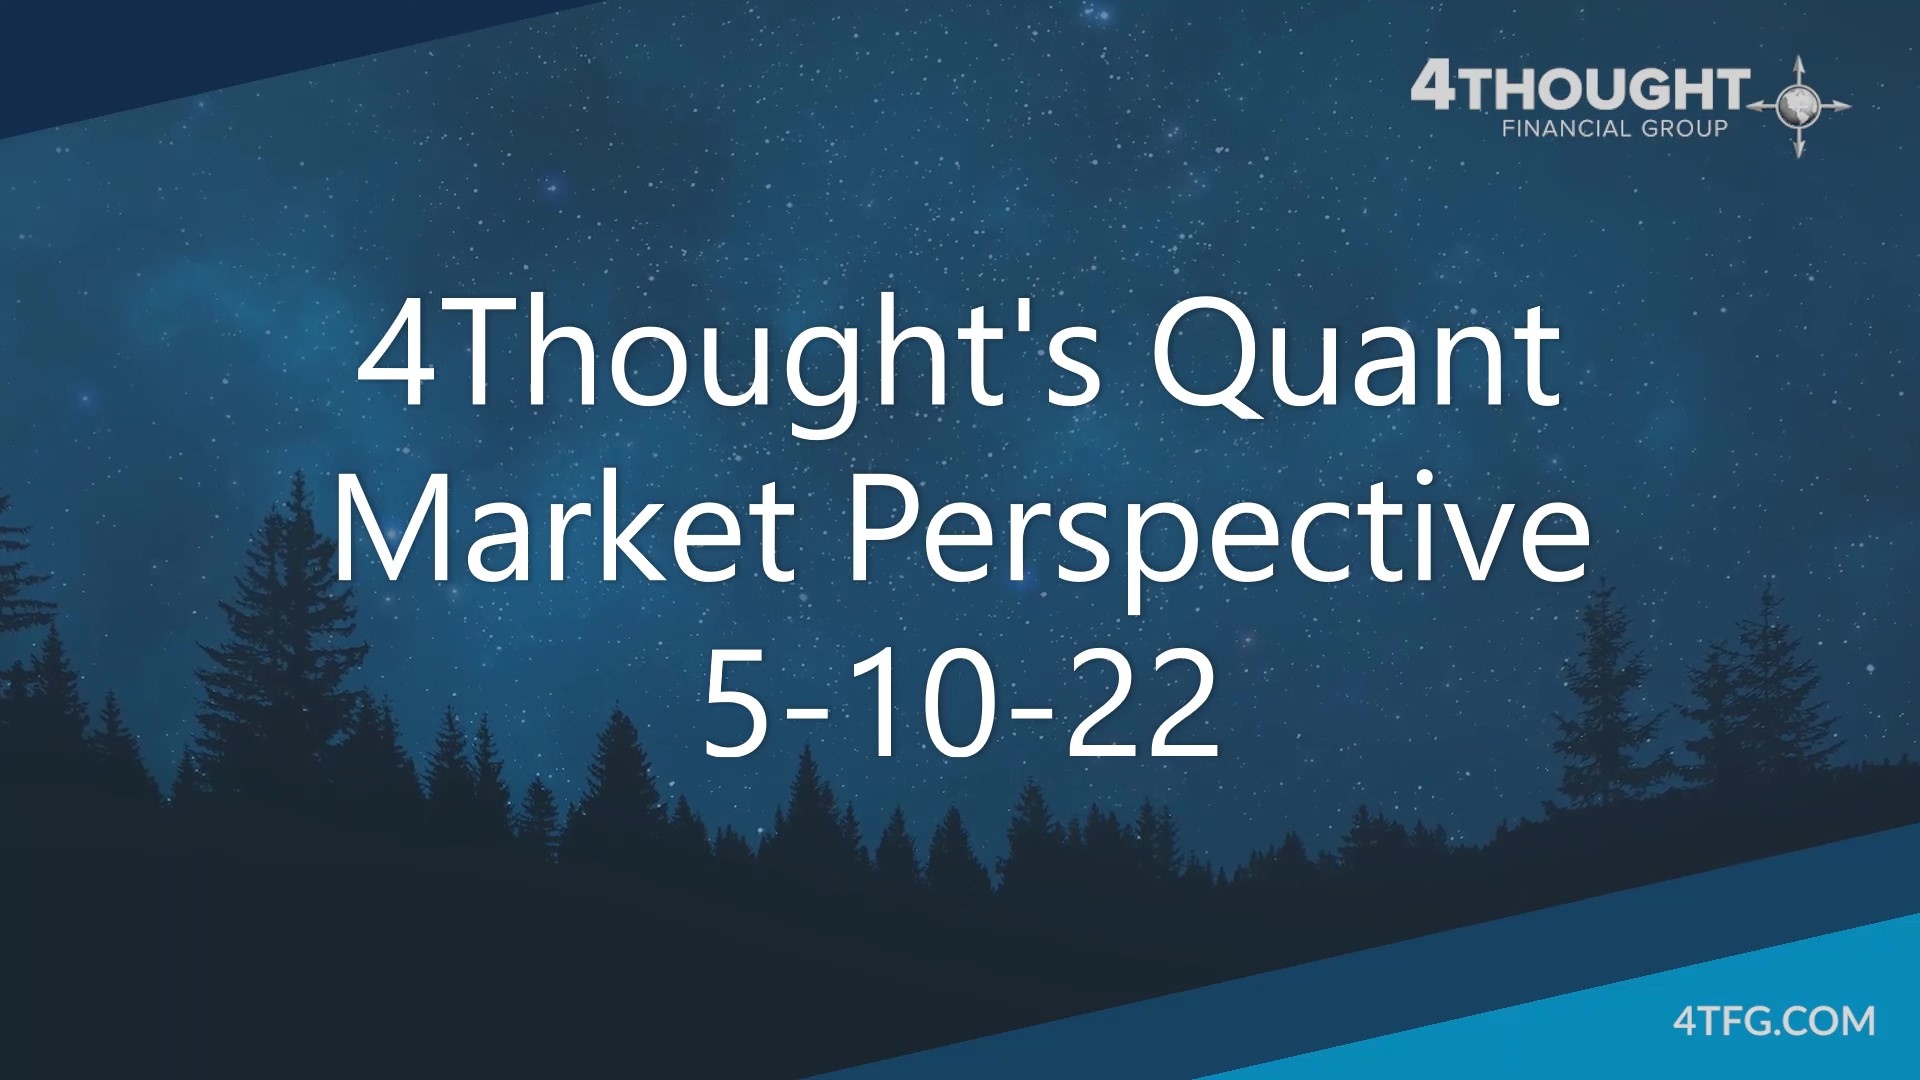 4Thought’s Quant Market Perspective 5-10-22